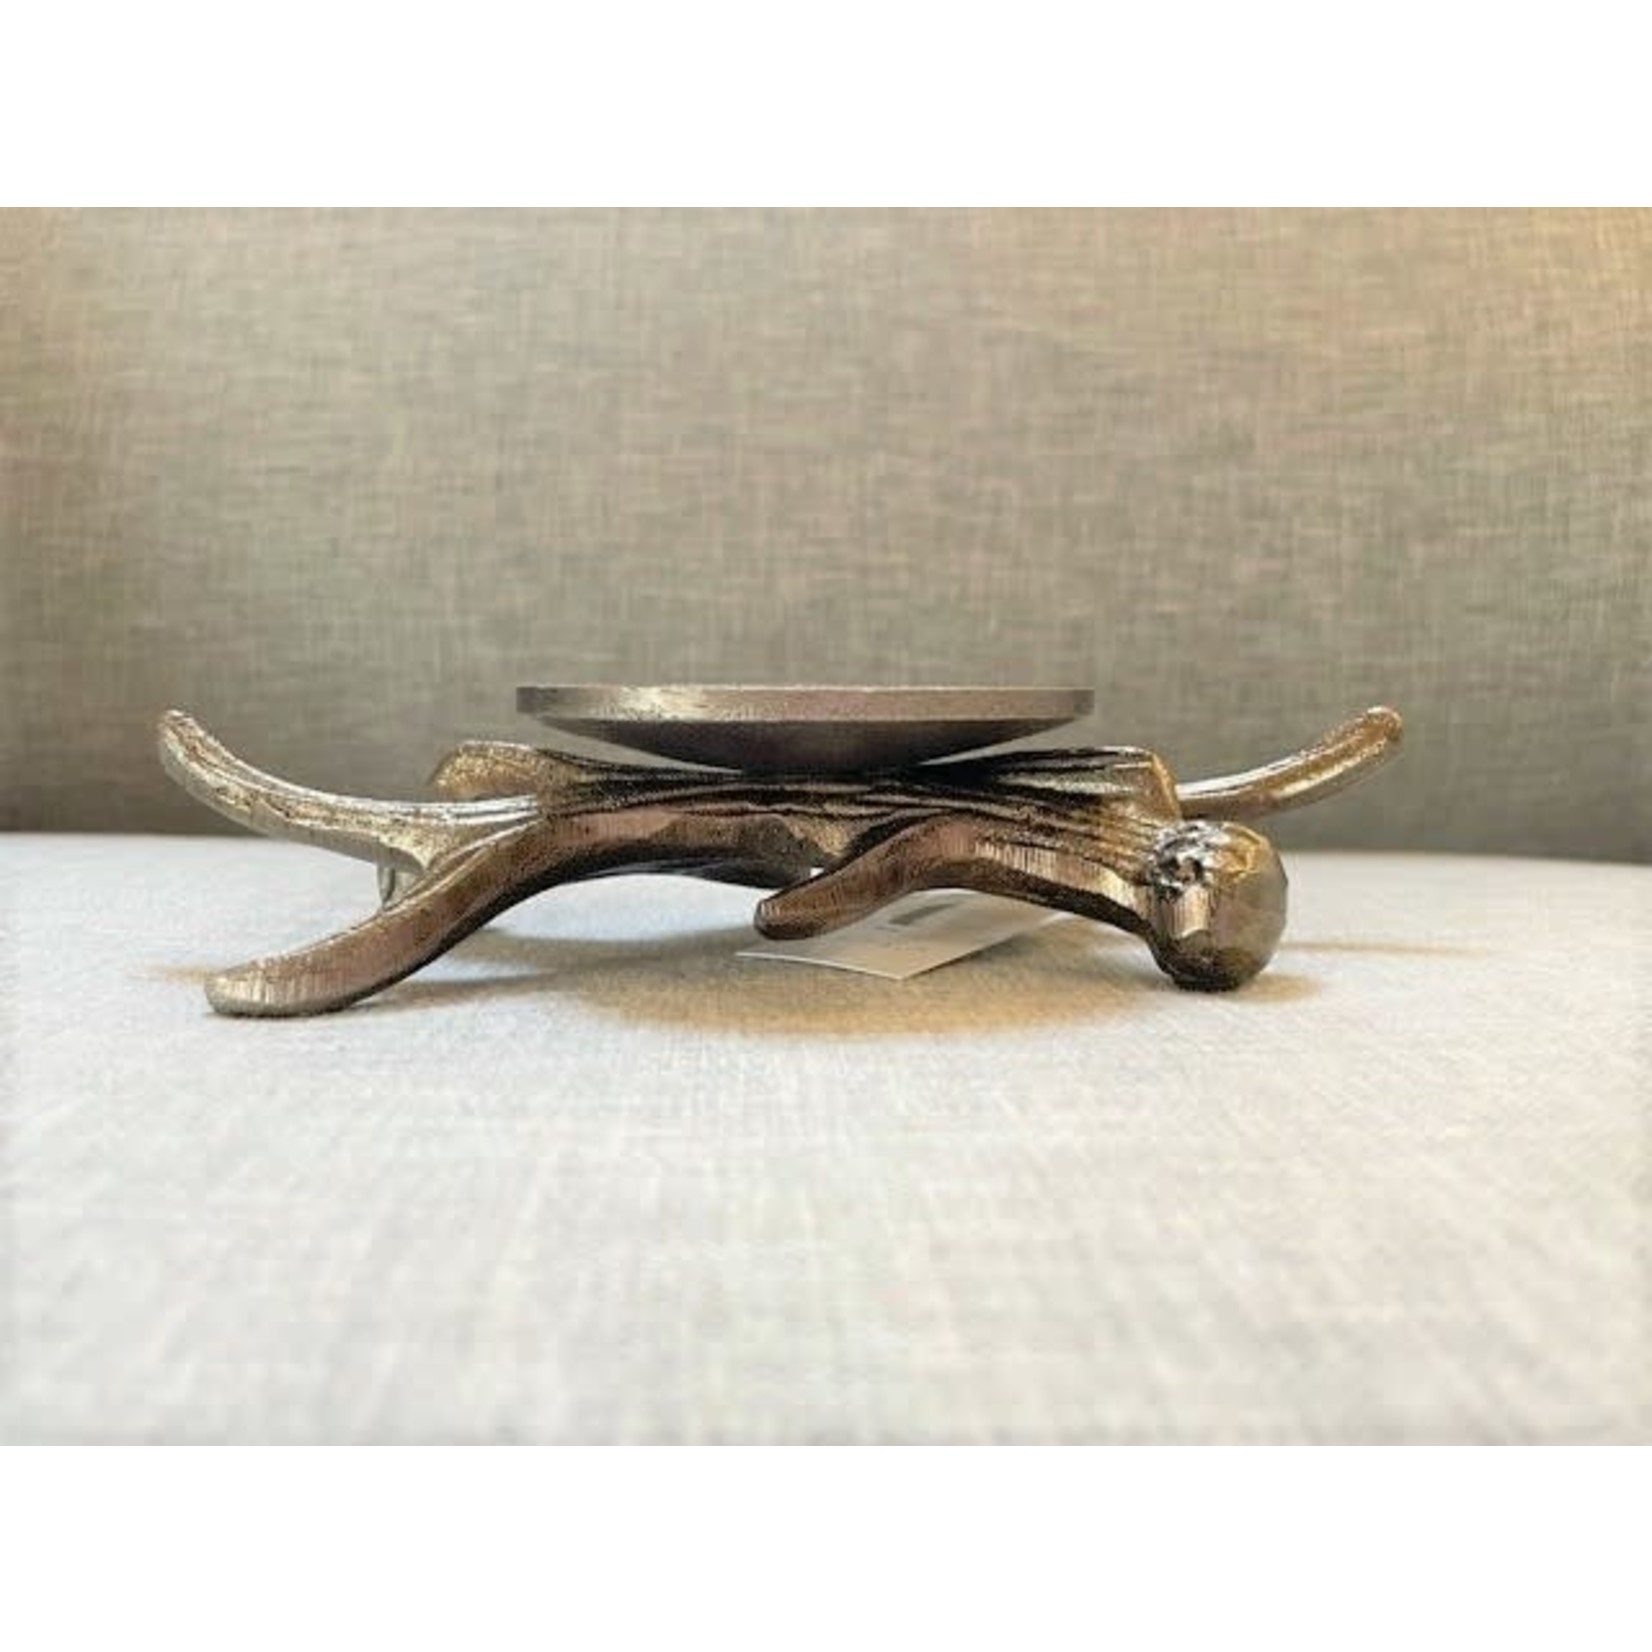 SMALL ANTLER CANDLE HOLDER